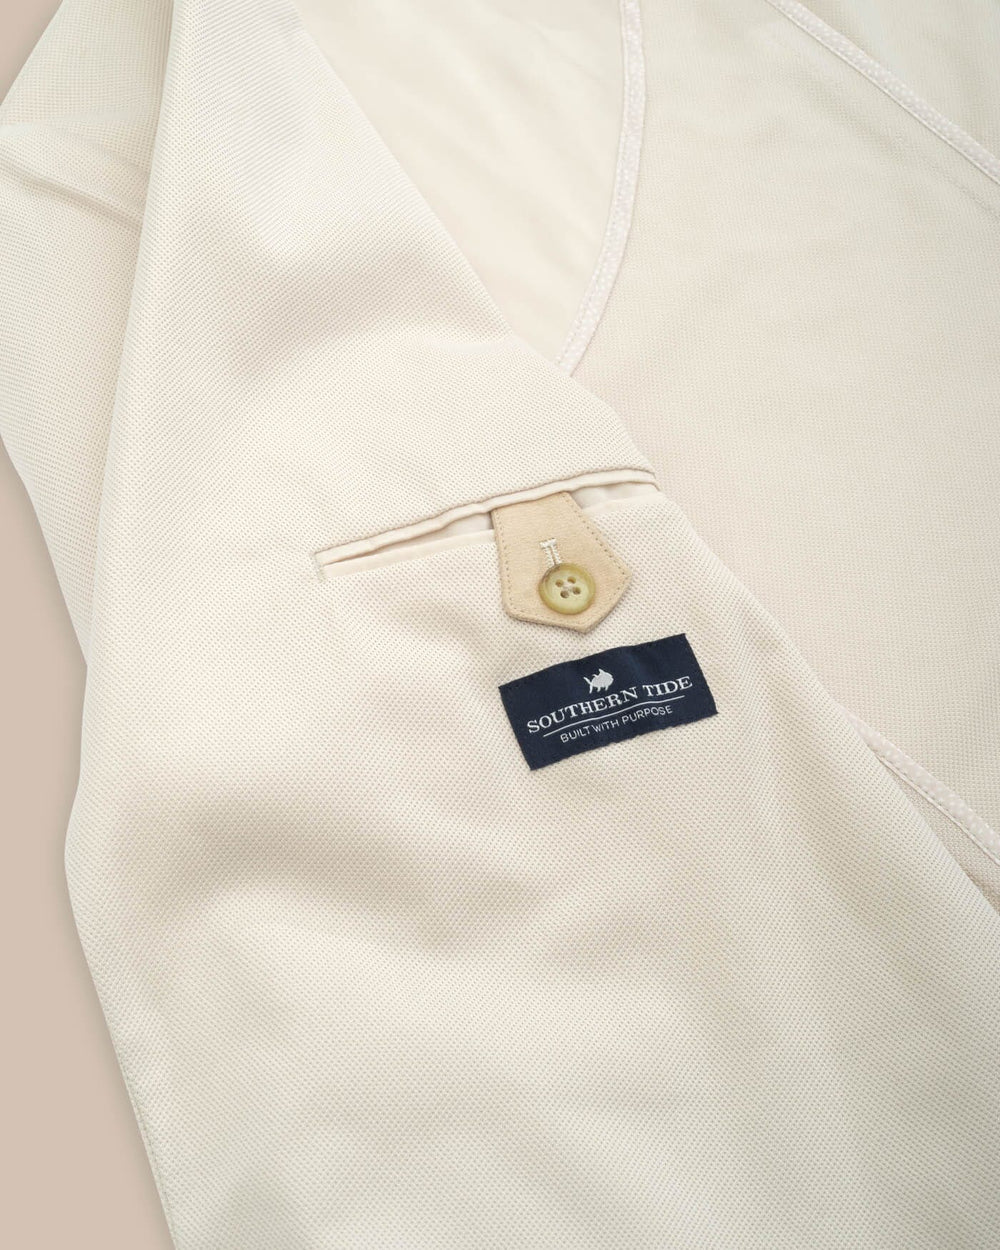 The detail view of the Southern Tide Charleston Navy Blazer by Southern Tide - Perfectly Pale Khaki